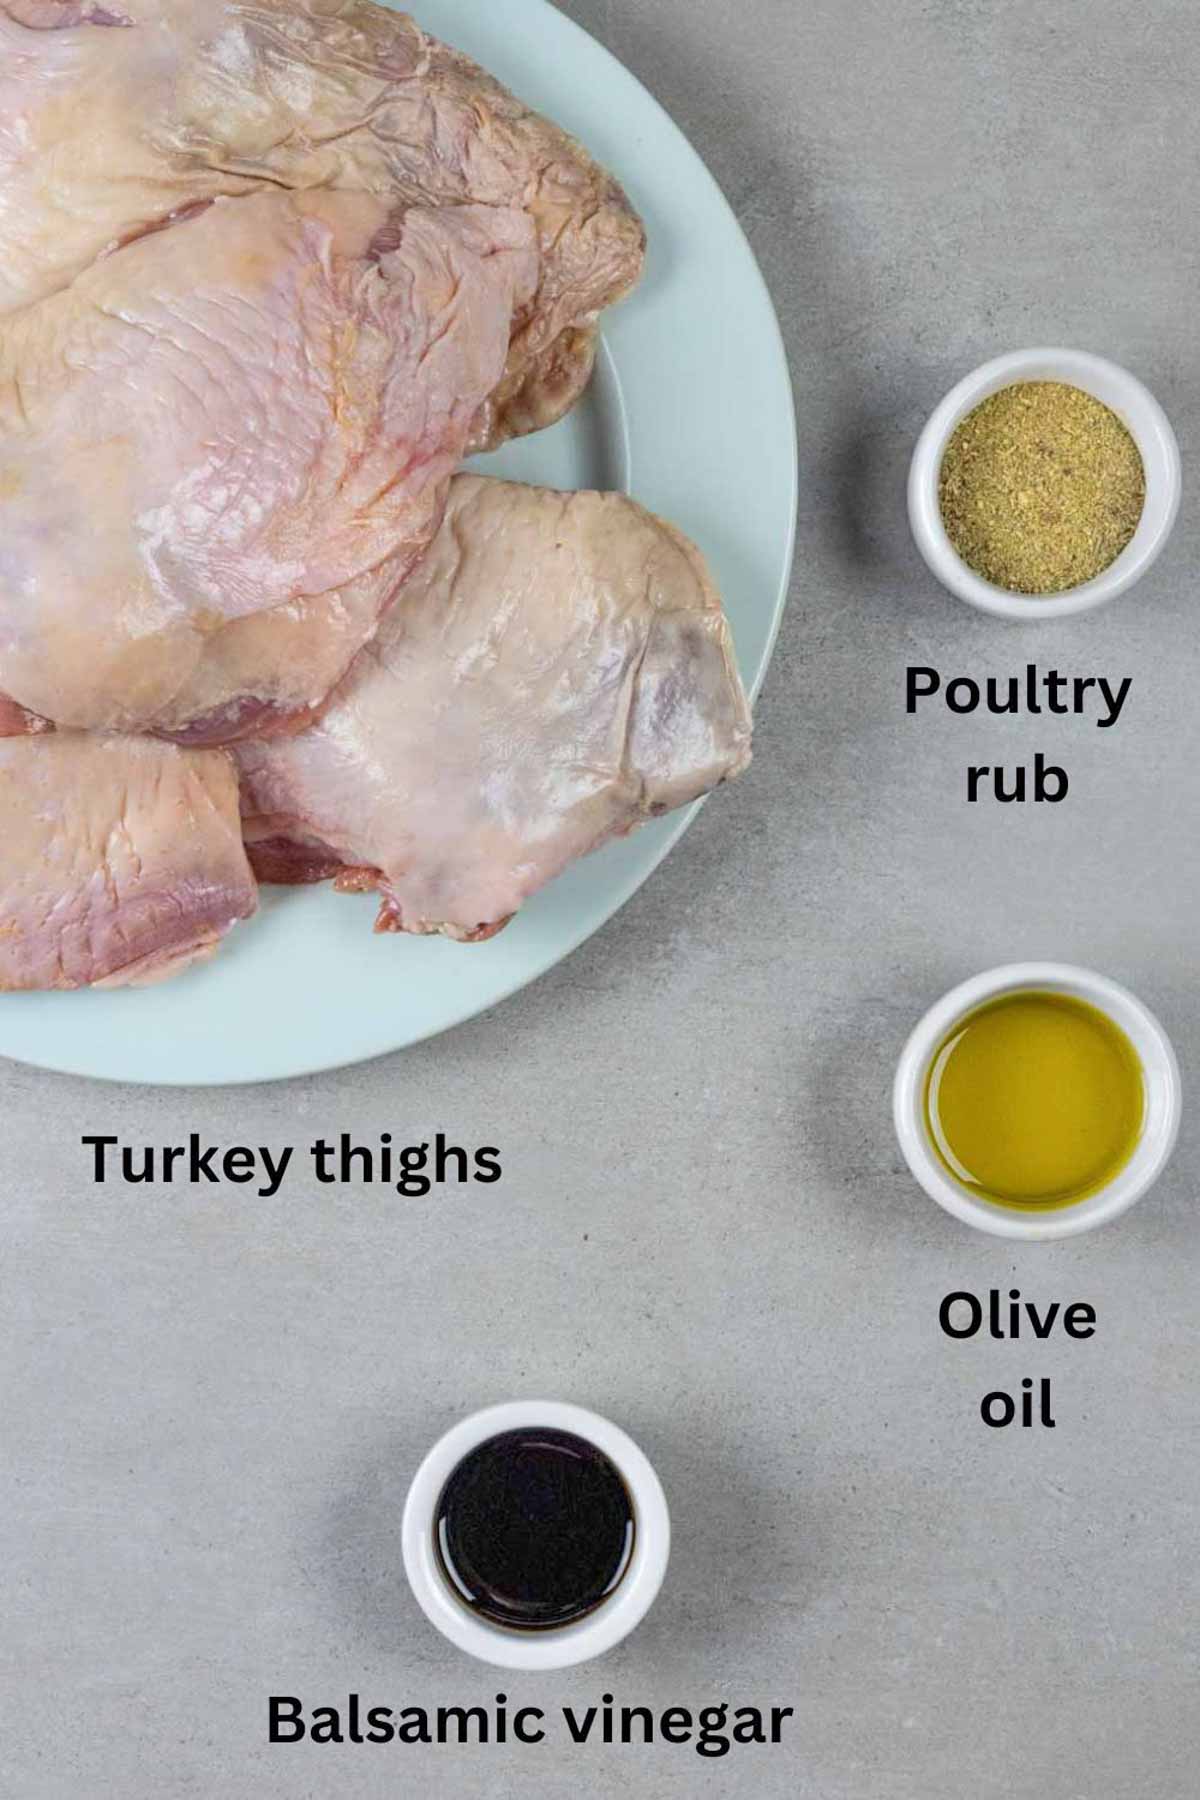 Ingredients for smoked turkey thighs on a board with black text labels.